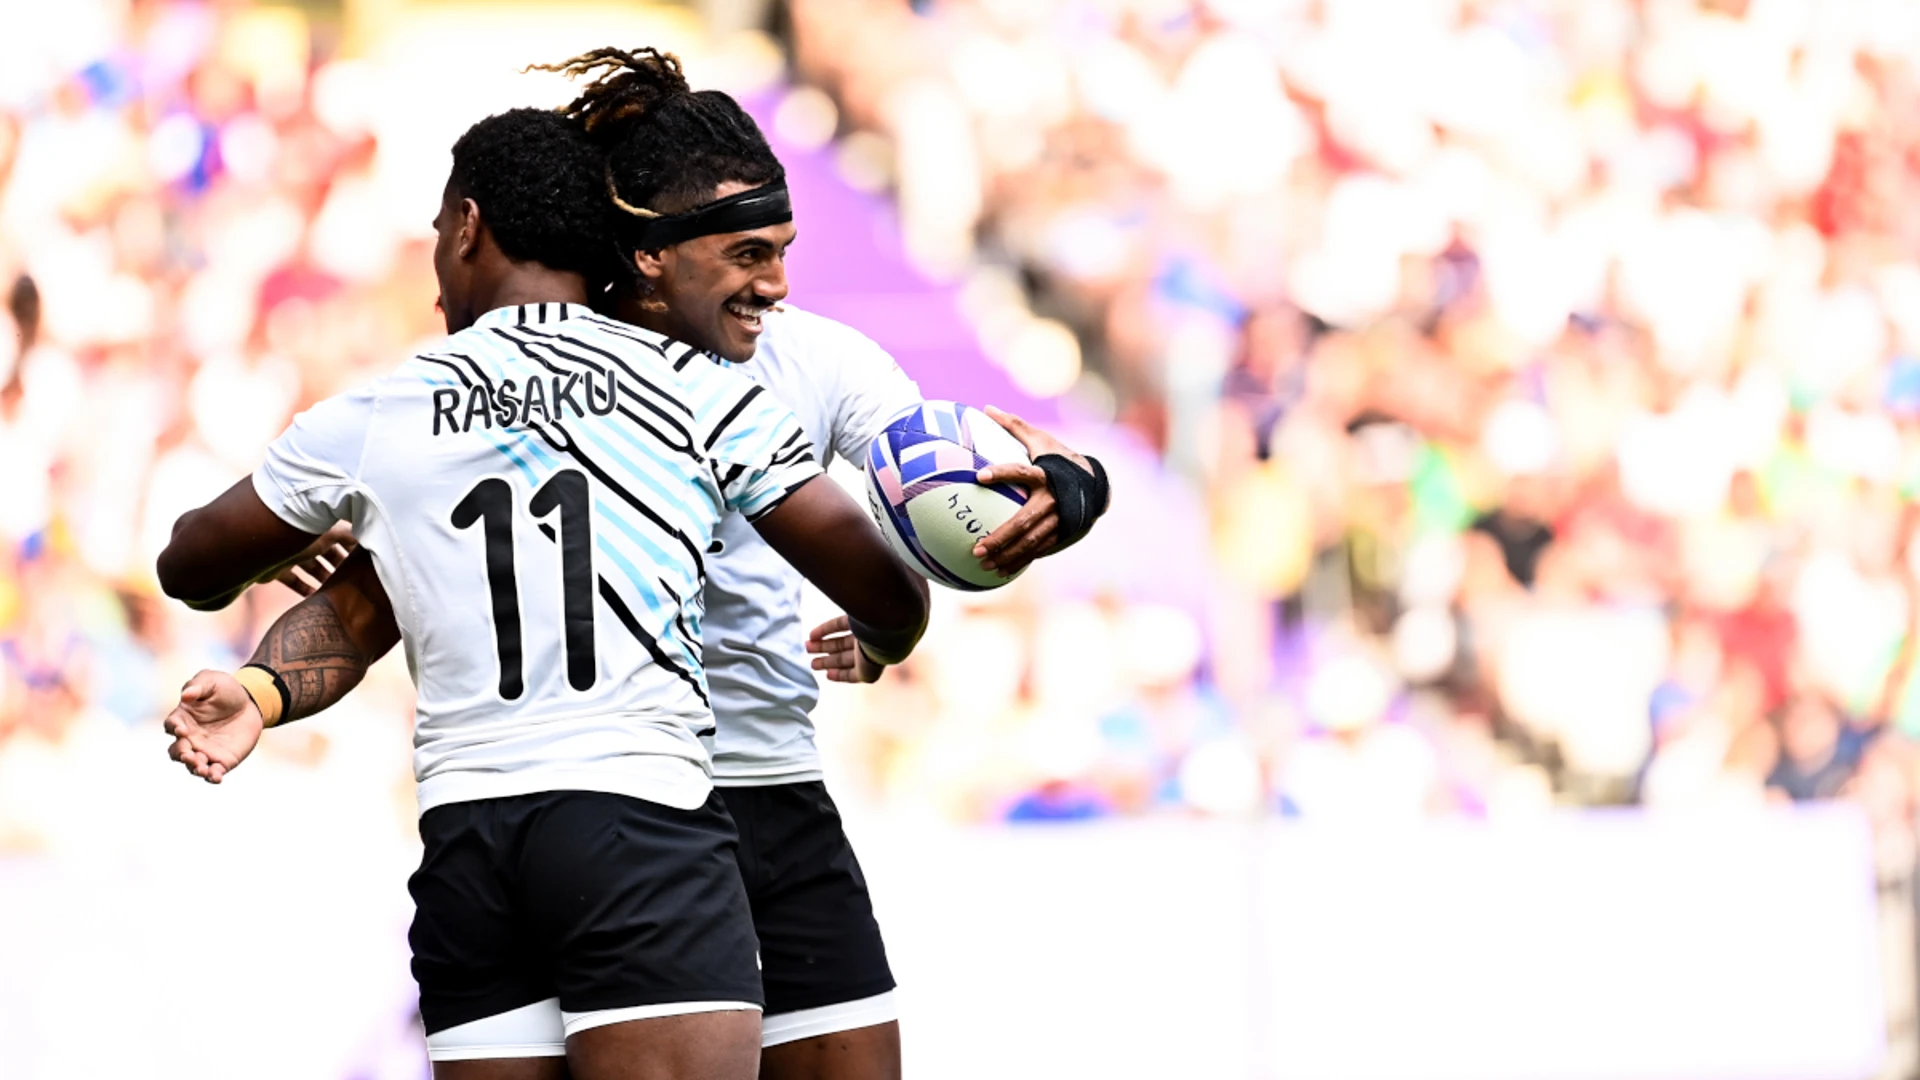 Favourites France fail to shine in Olympic rugby sevens, Fiji sparkle